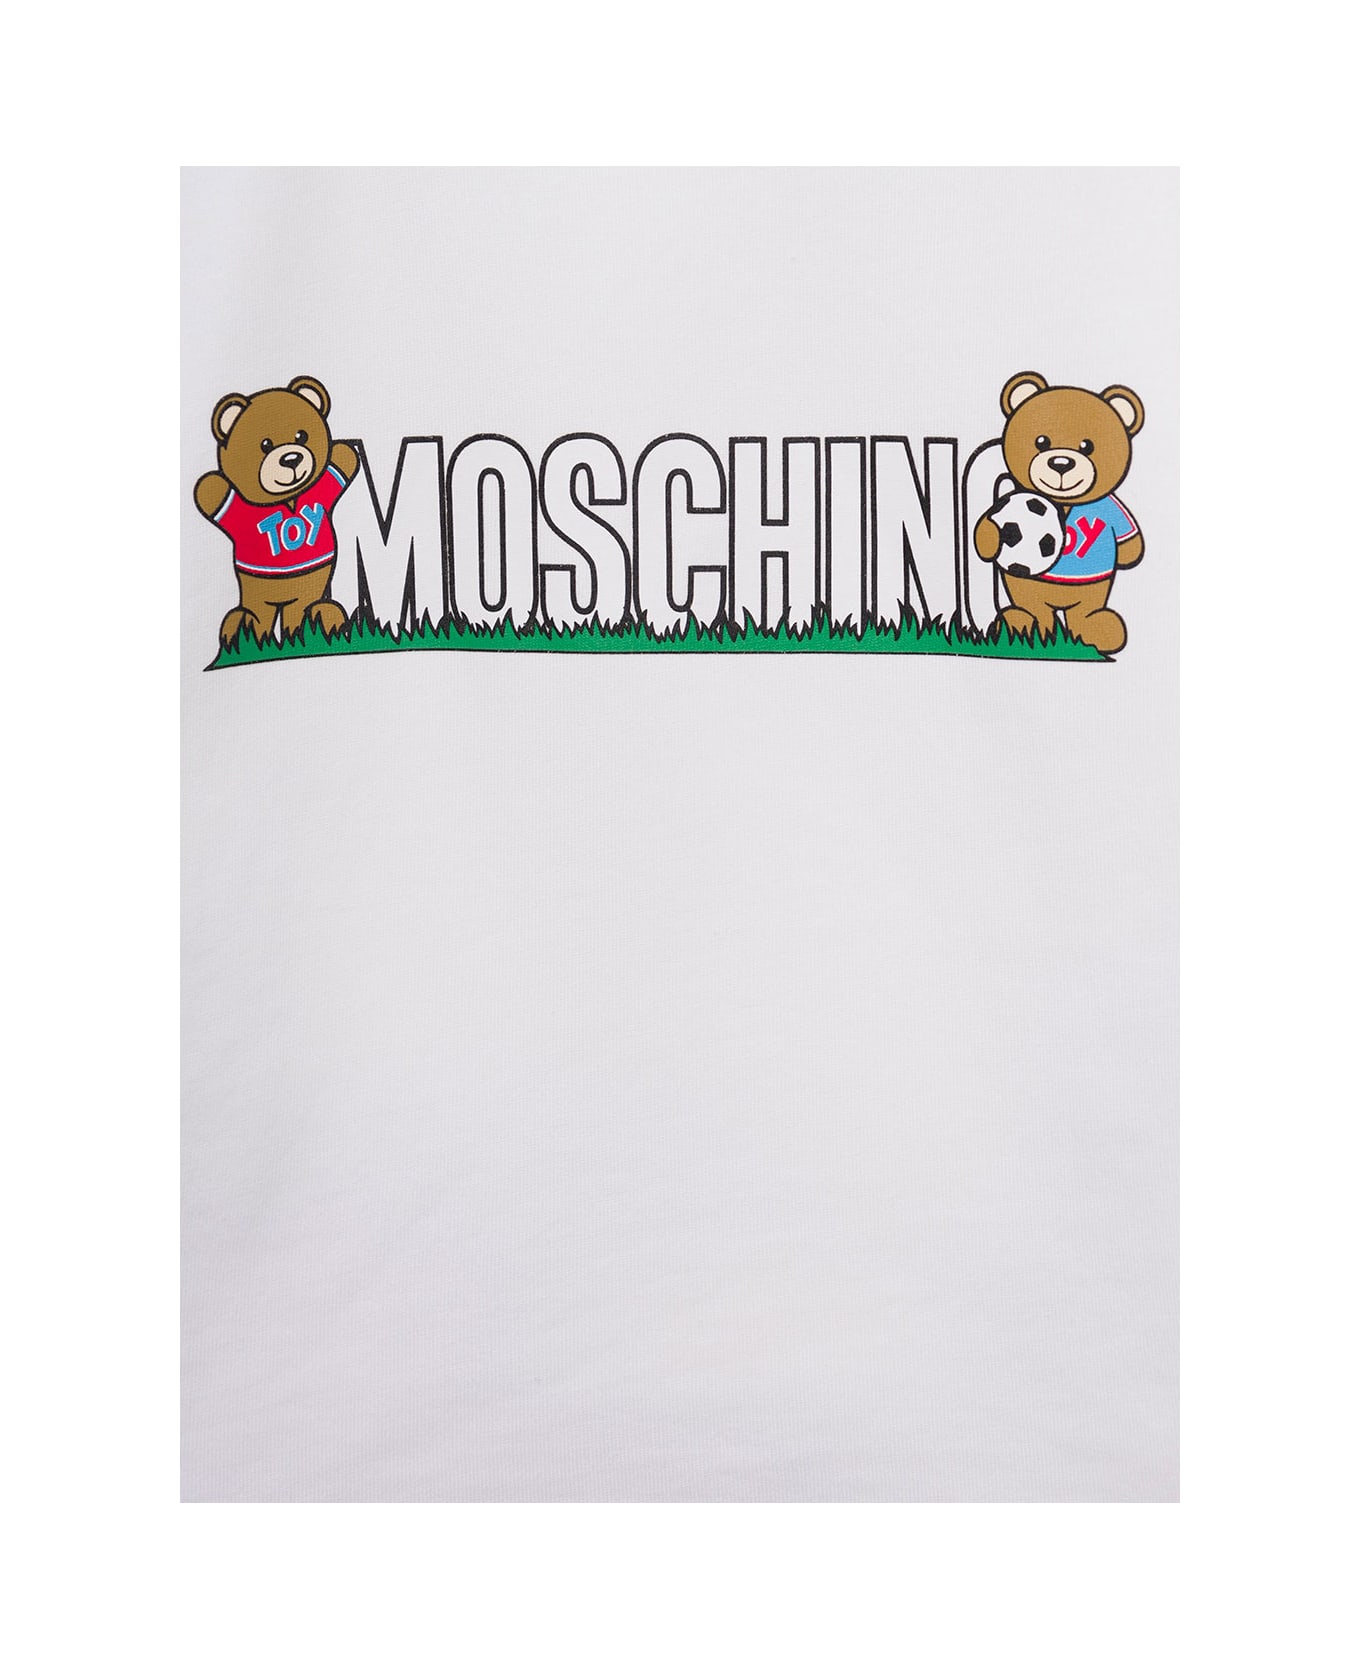 Moschino Grey And White T-shirt And Shorts Suit With Teddy Bear And Logo Print In Cotton Baby - Multicolor